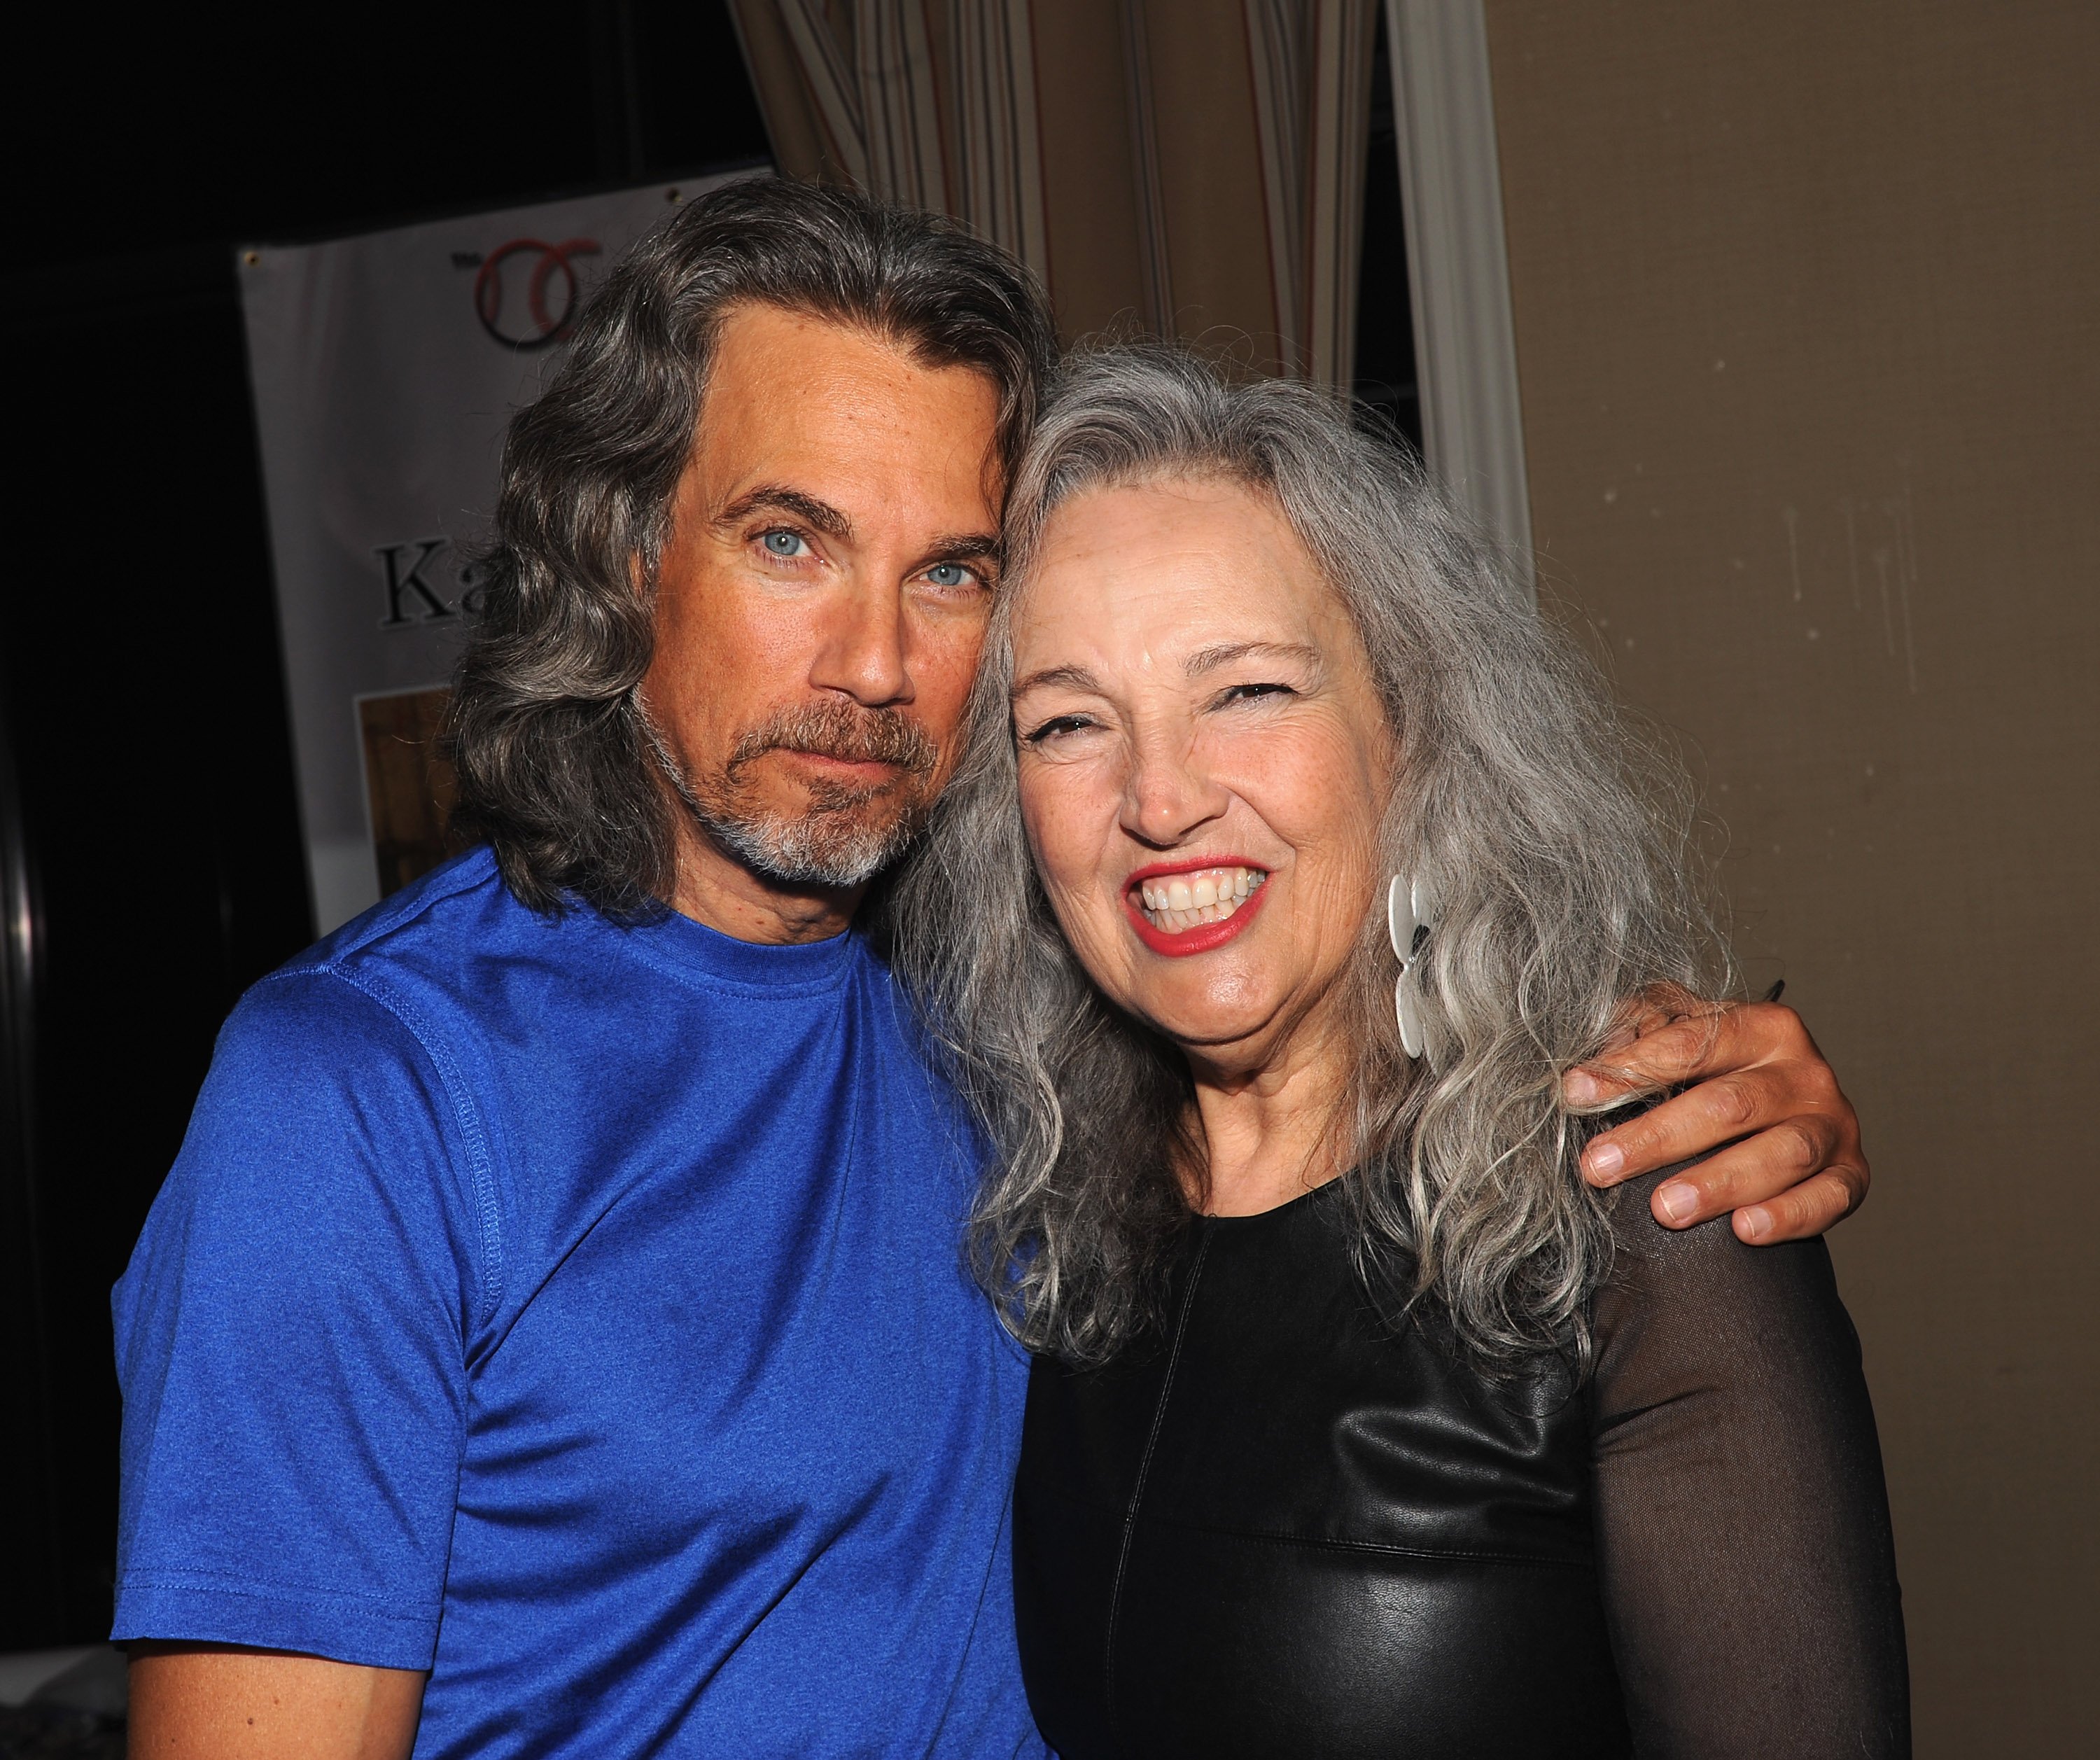 Robby Benson and Karla DeVito attending the Chiller Theatre Expo - Day 1, 2015, Parsippany, New Jersey. | Source: Getty Images